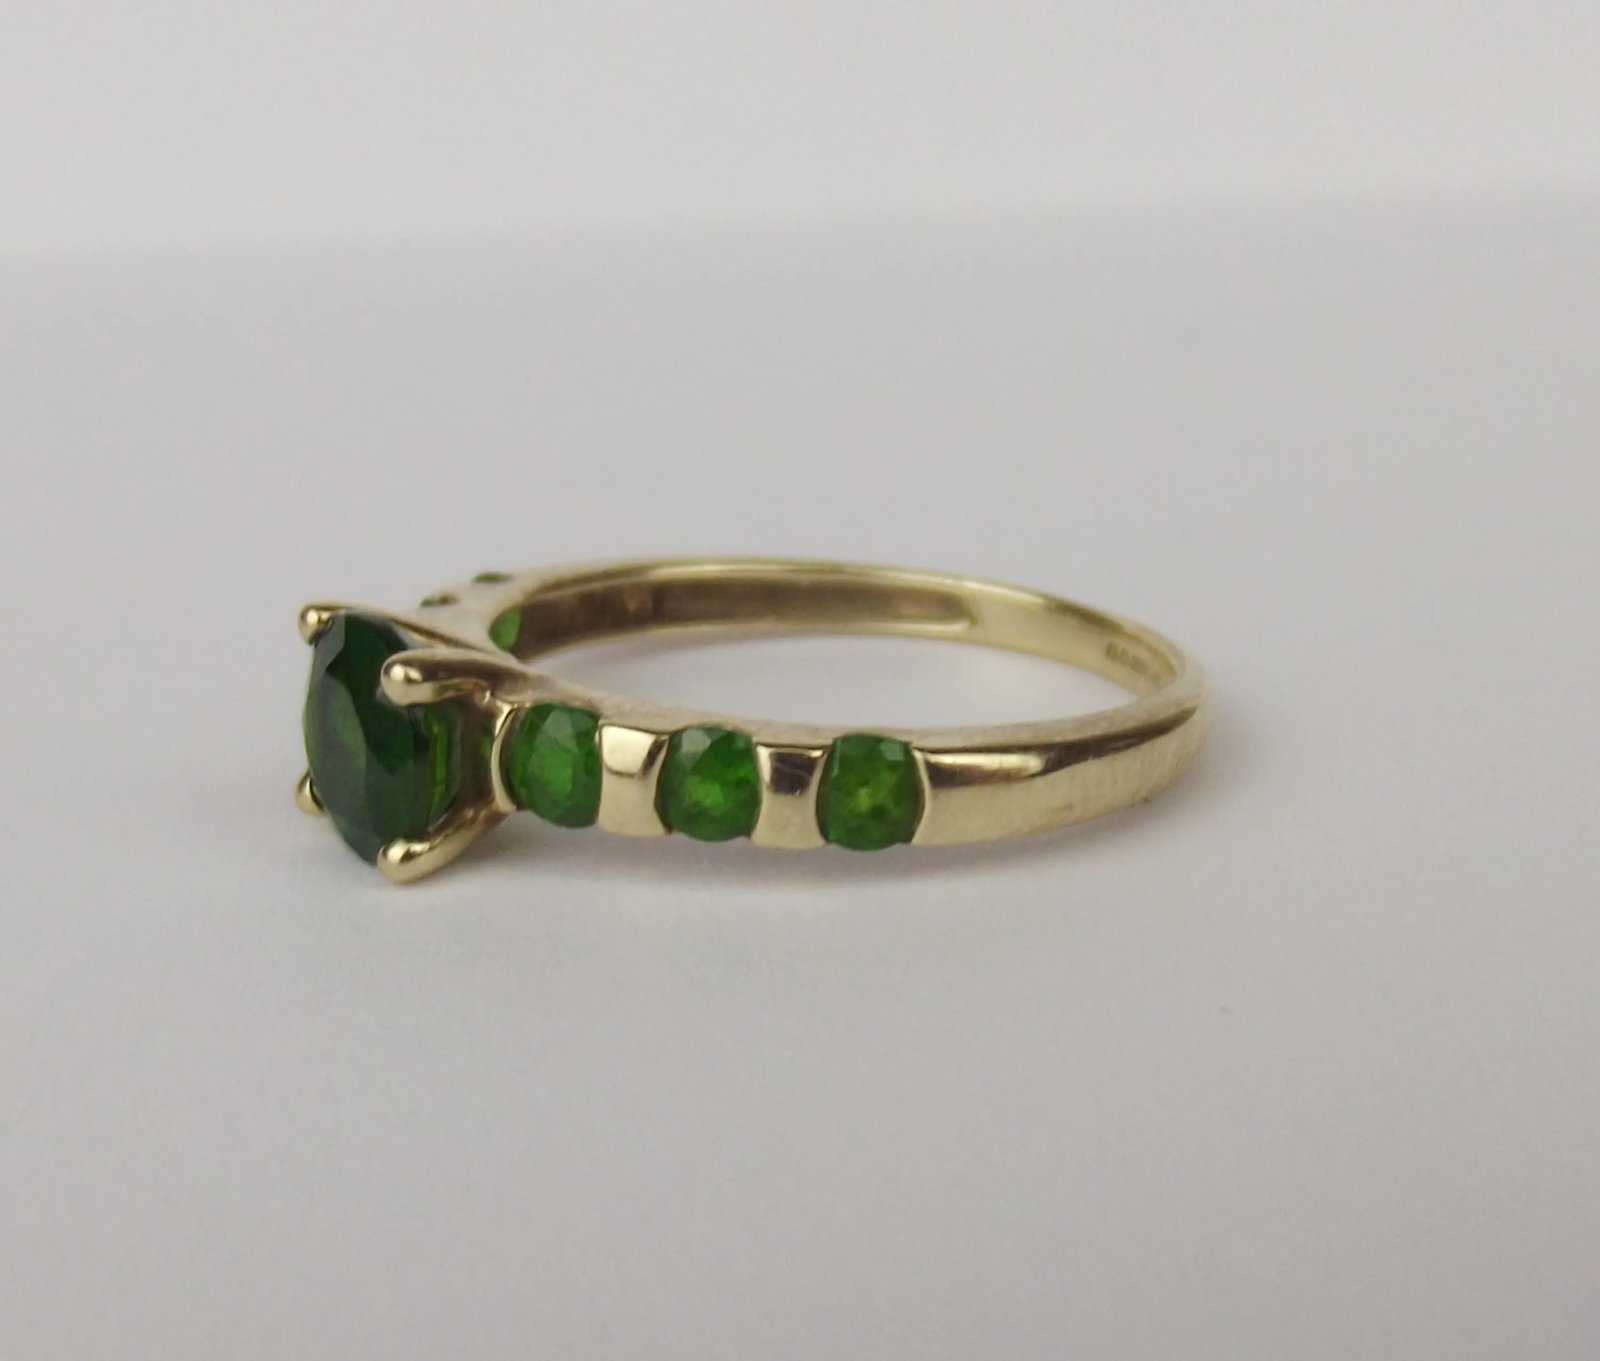 9ct Yellow Gold Russian Diopside Ring UK Size N US 6 ½ - Sally Antiques